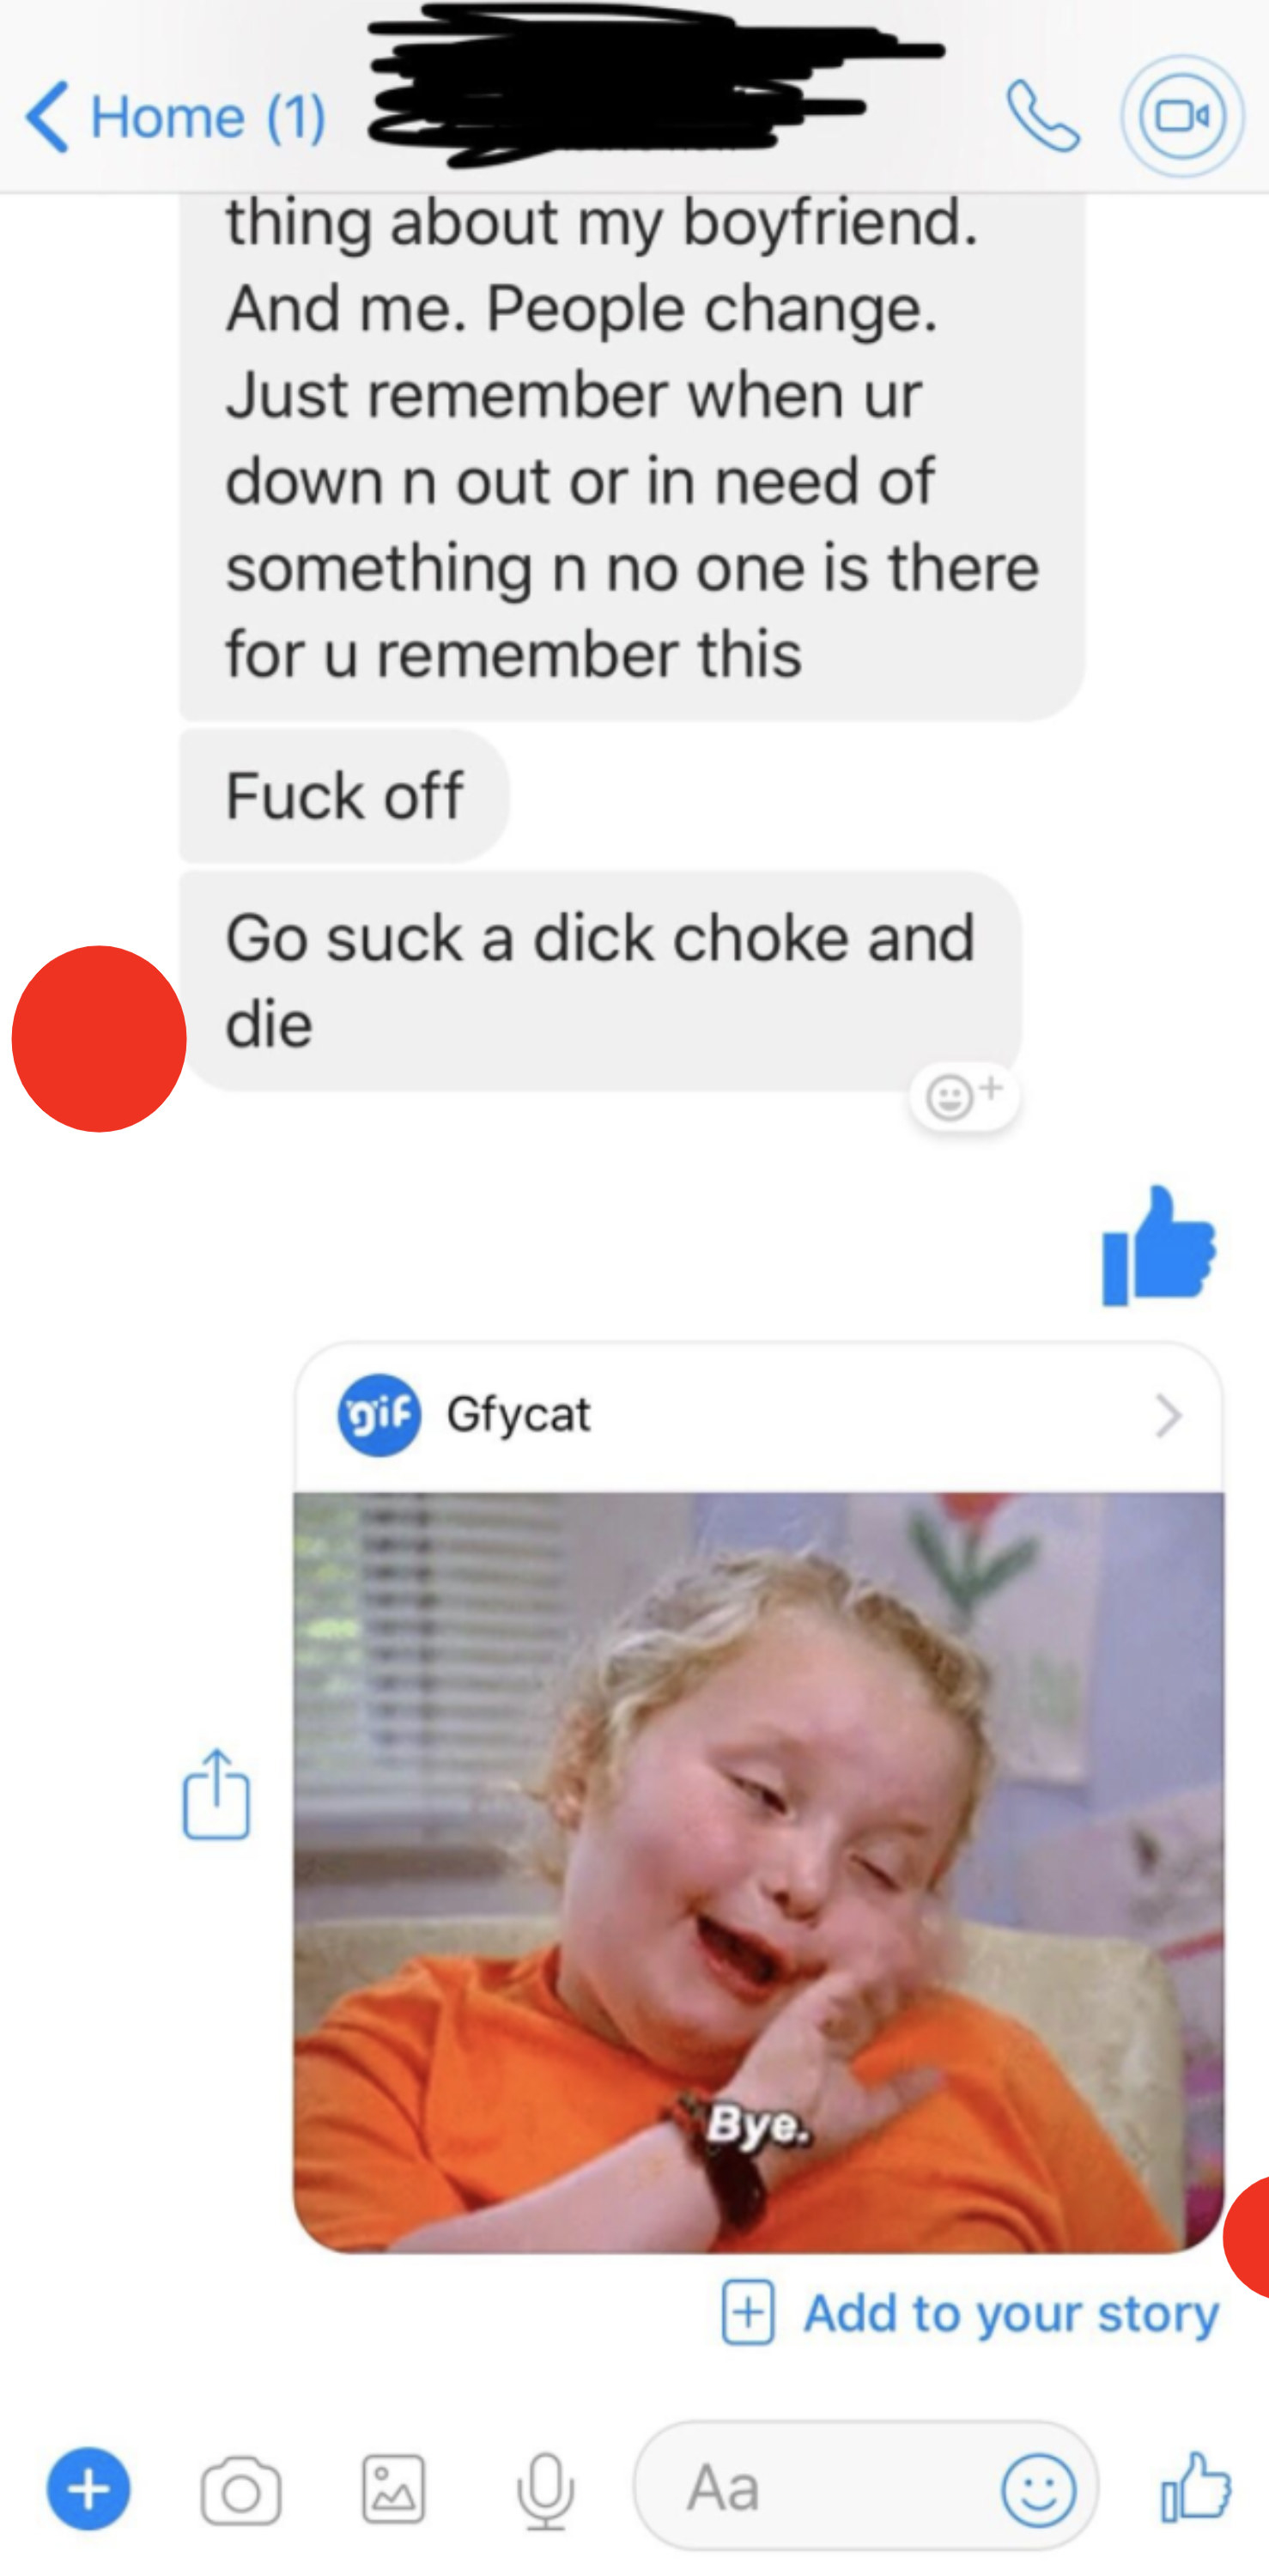 Ex-girlfriend: &quot;Go suck a dick, choke, and die&quot;